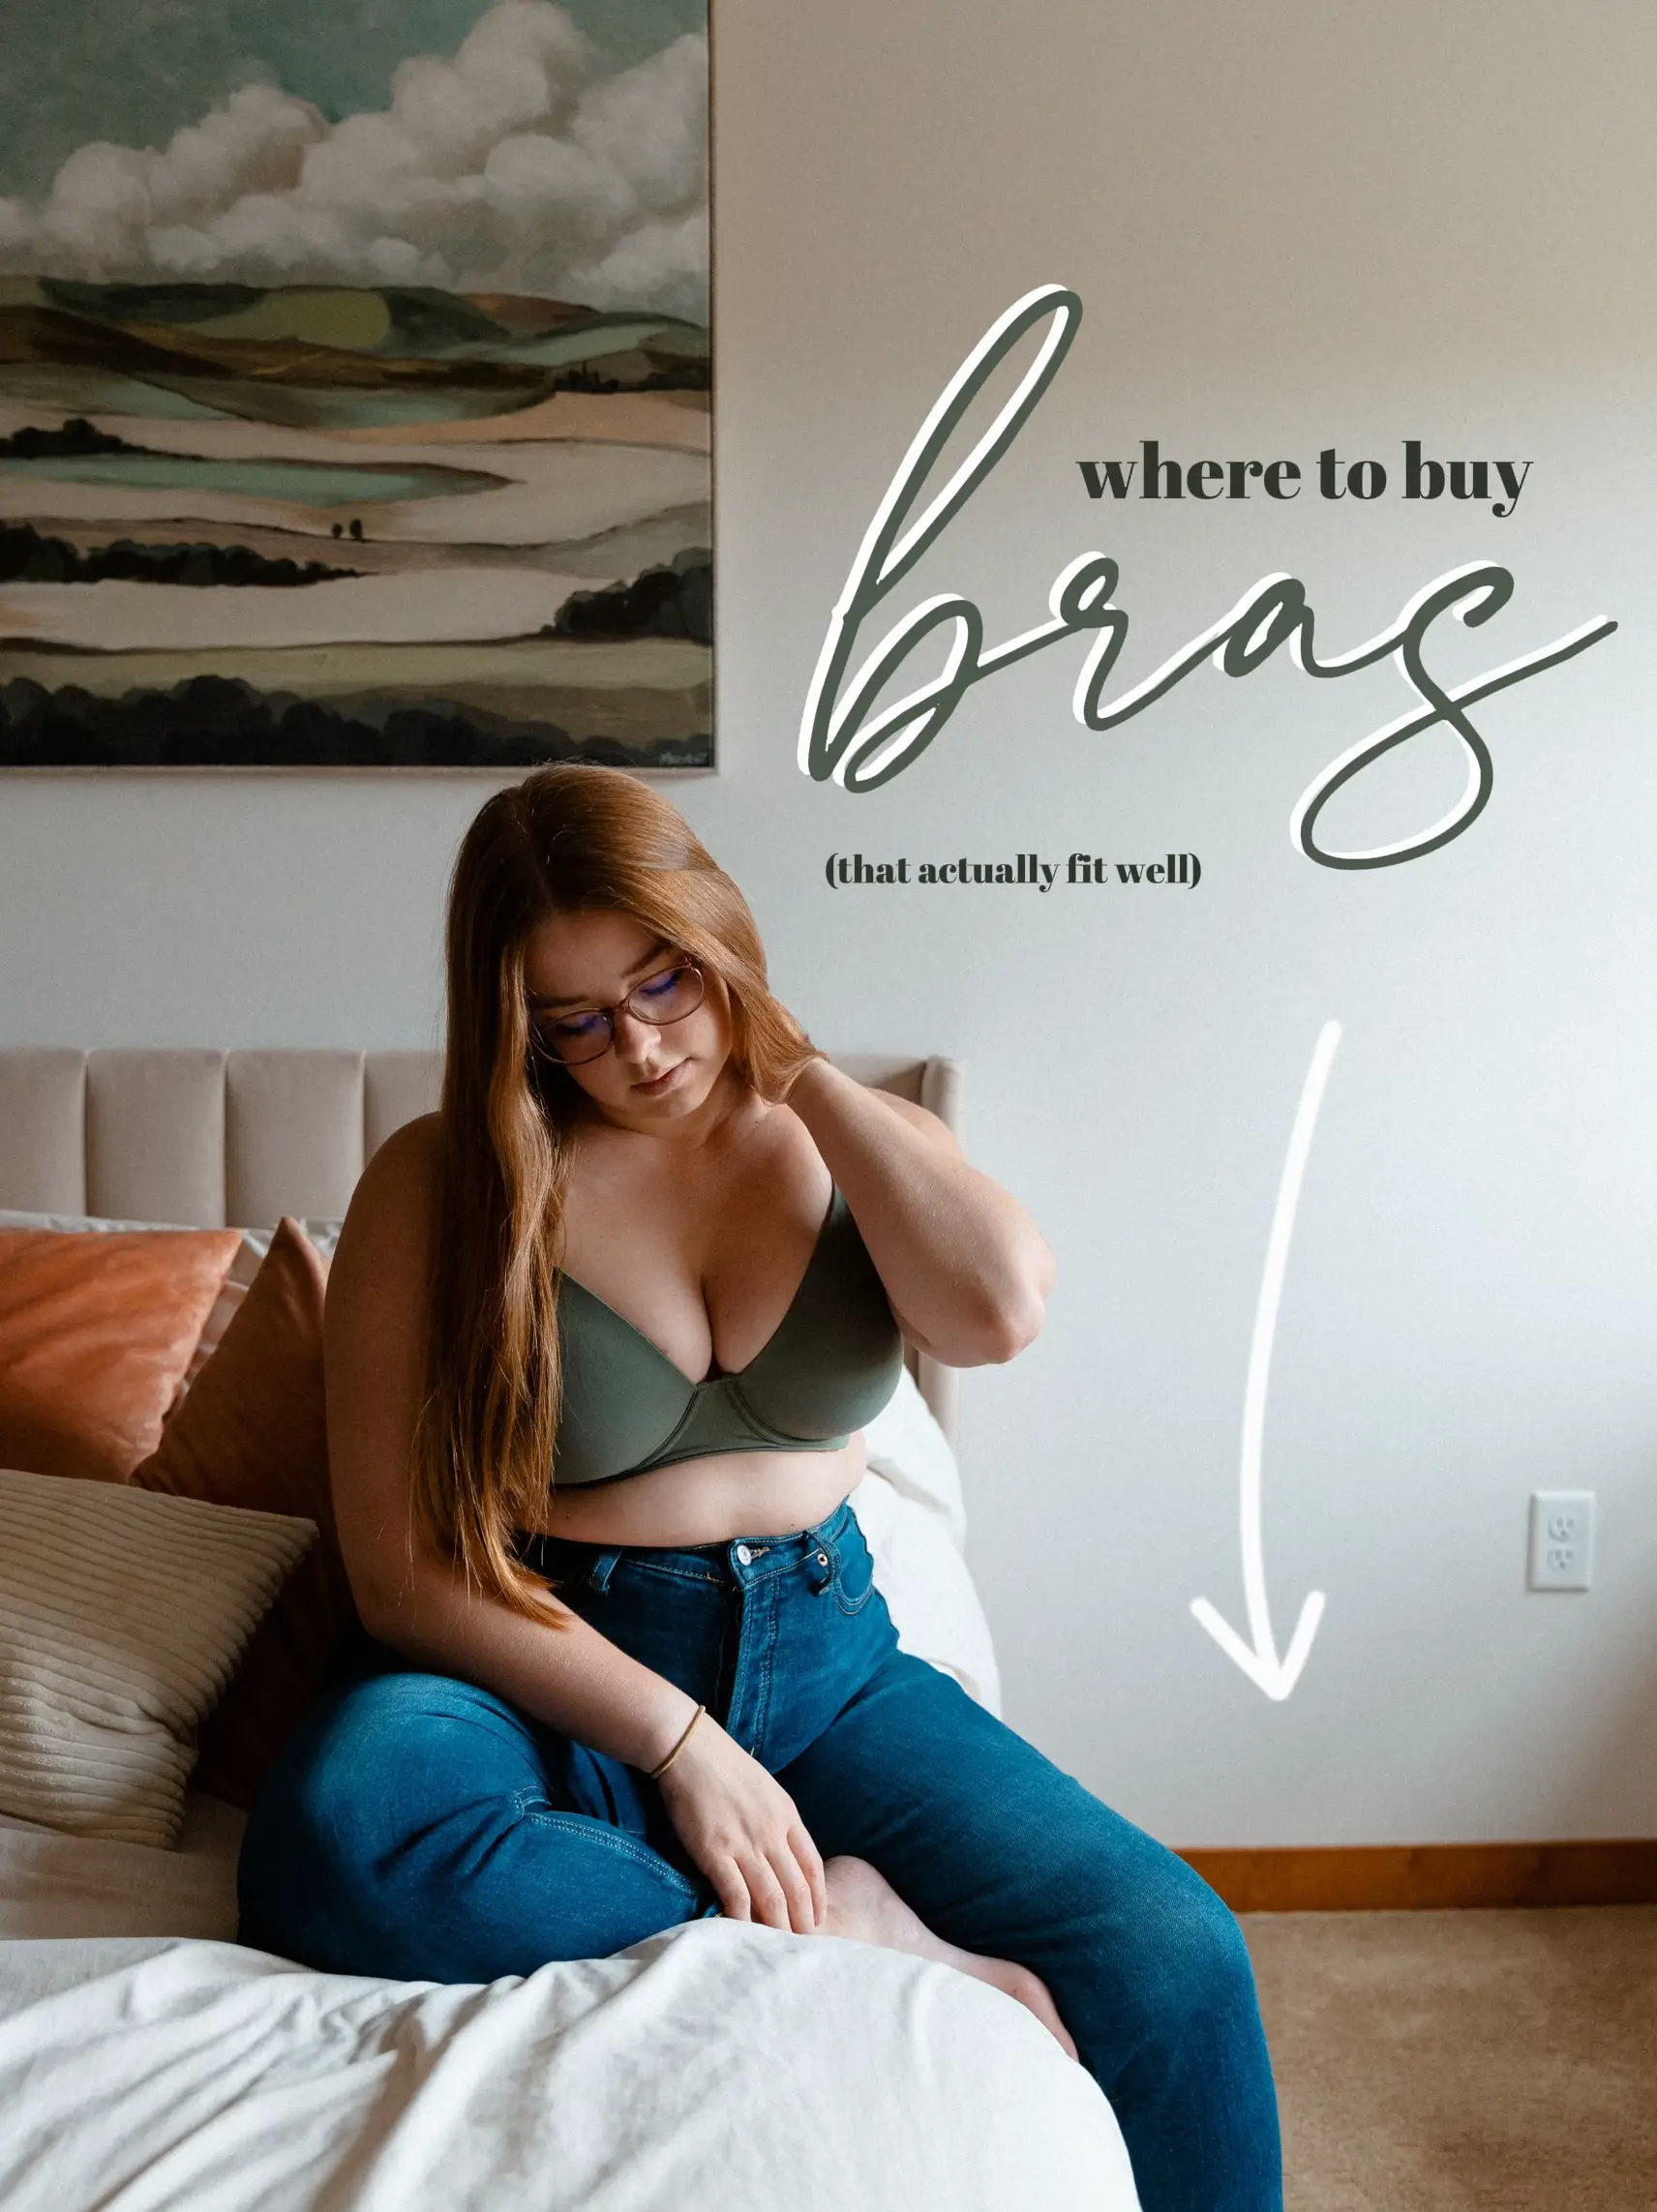 GATHERALL BRA BEFORE + AFTER TRY-ON 🍈🍈 - Watch my full review on